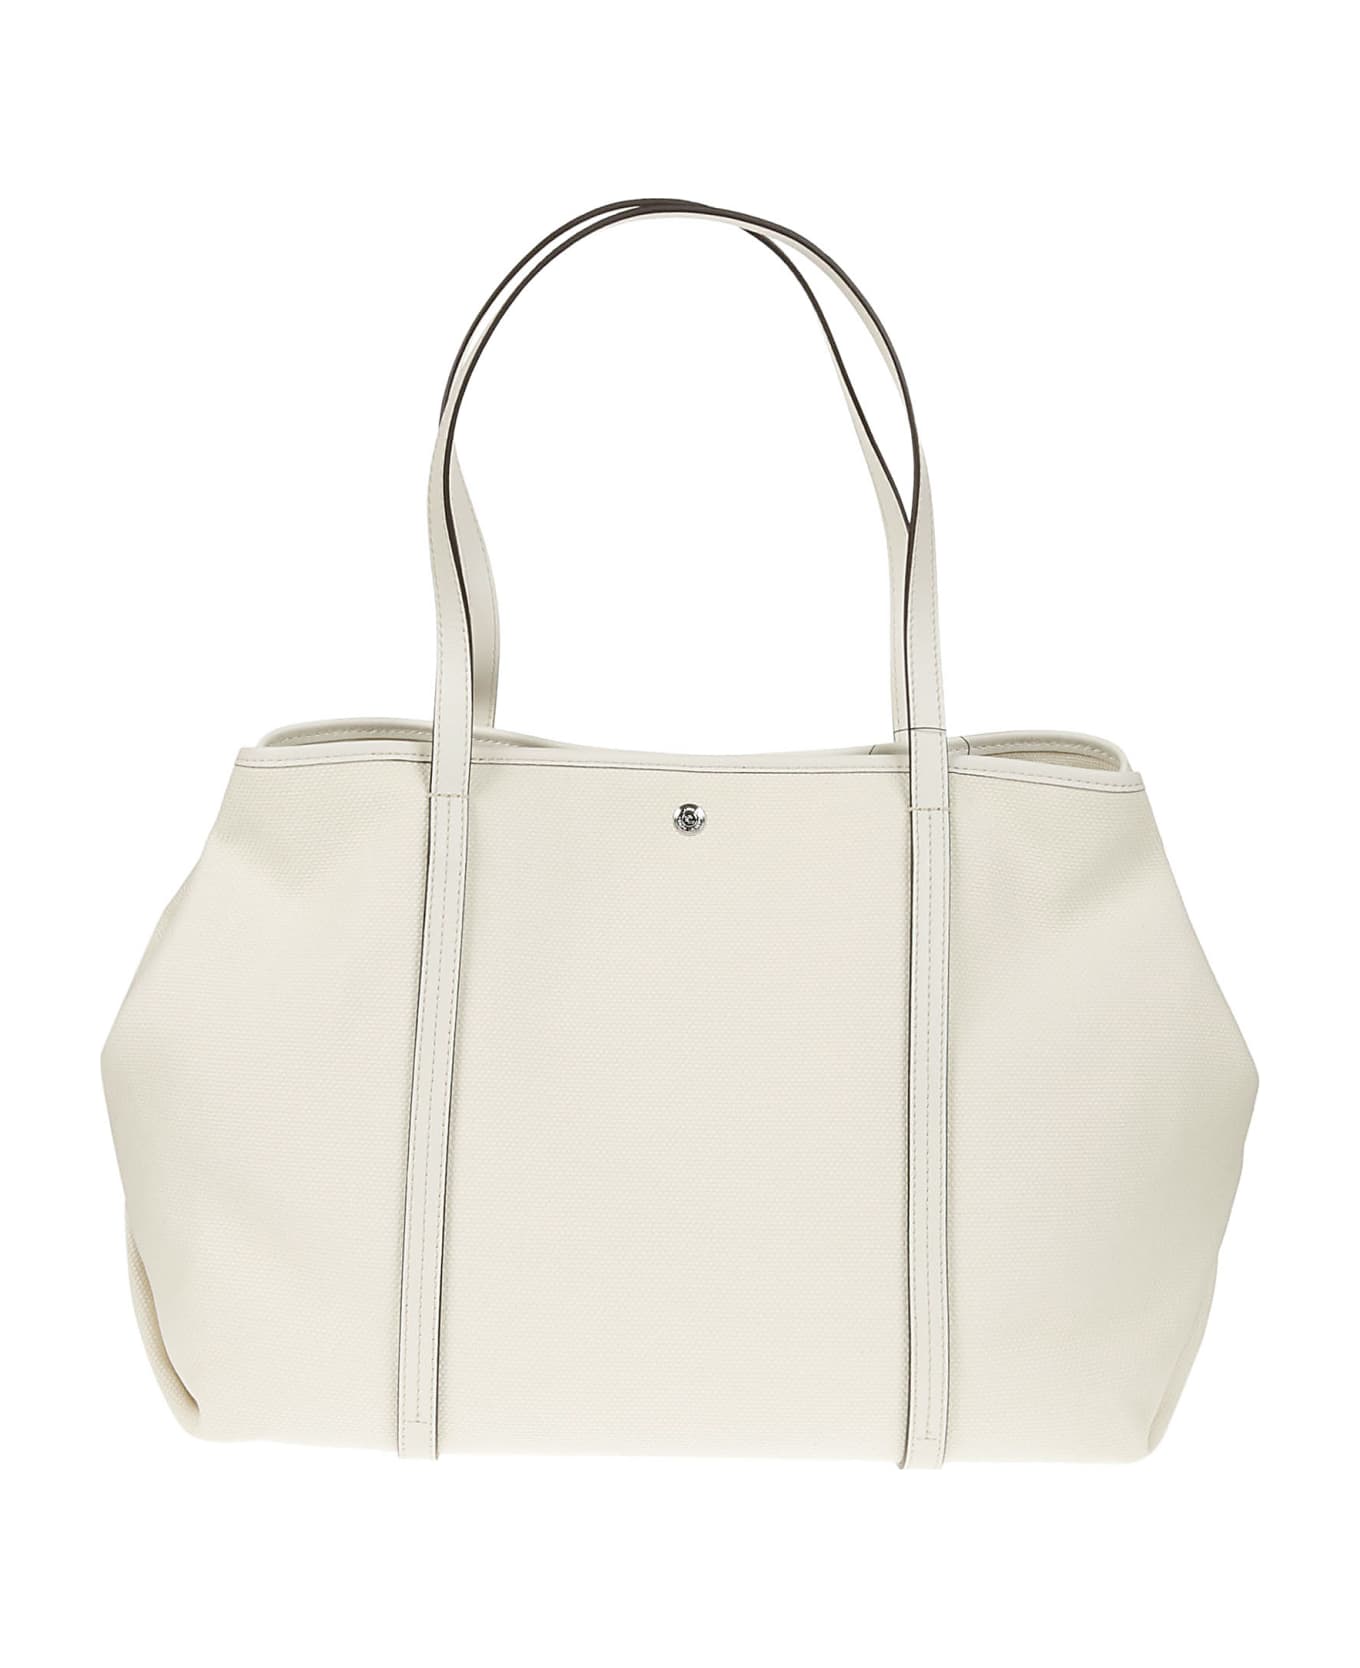 Ralph Lauren Emerie Tote Tote Extra Large - Natural Soft White/soft White